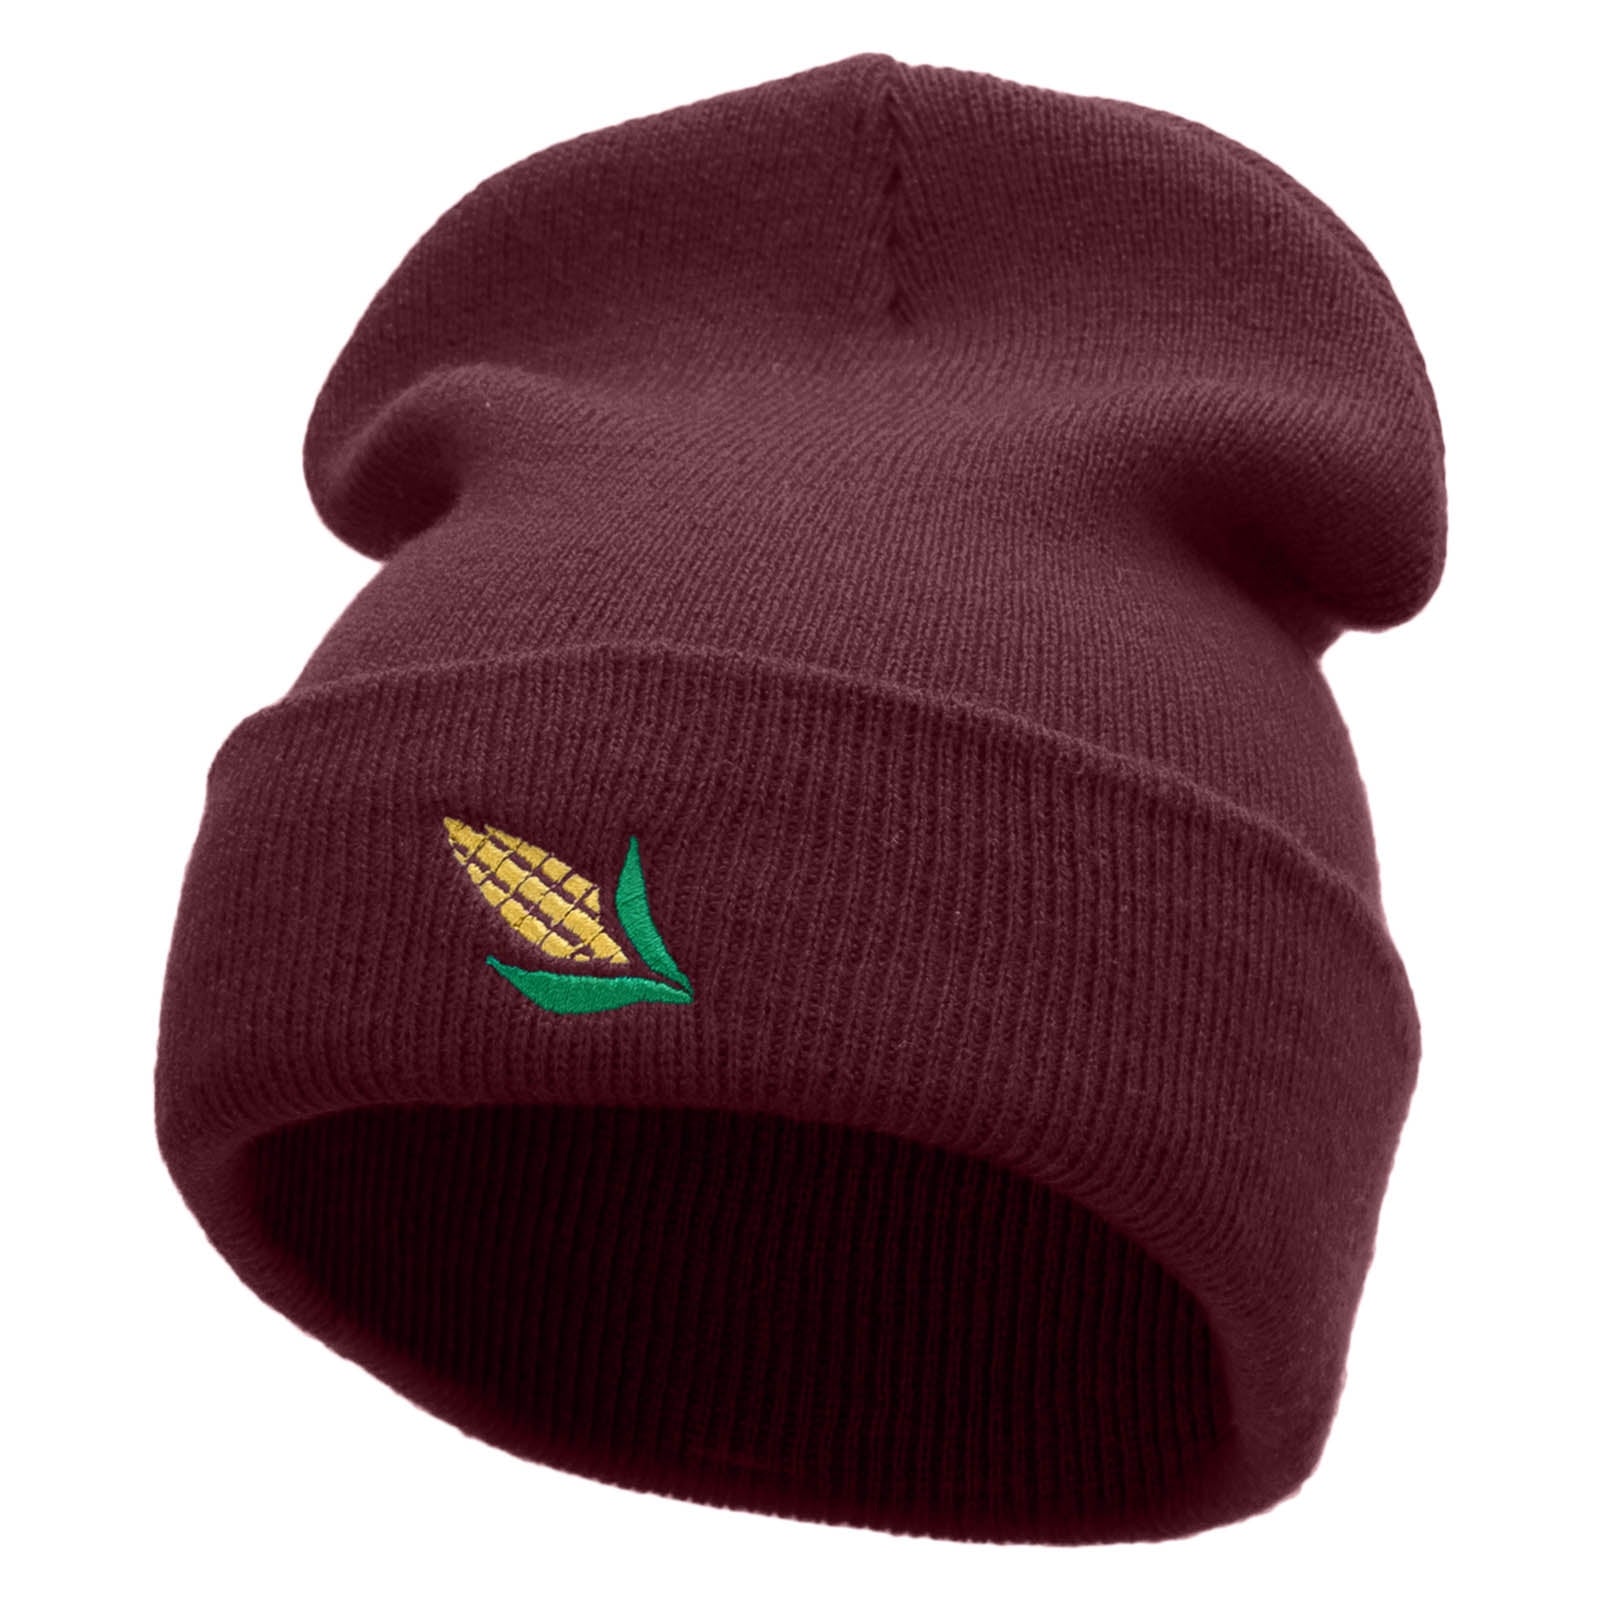 Corn Cob Embroidered 12 Inch Solid Long Beanie Made in USA - Burgundy OSFM